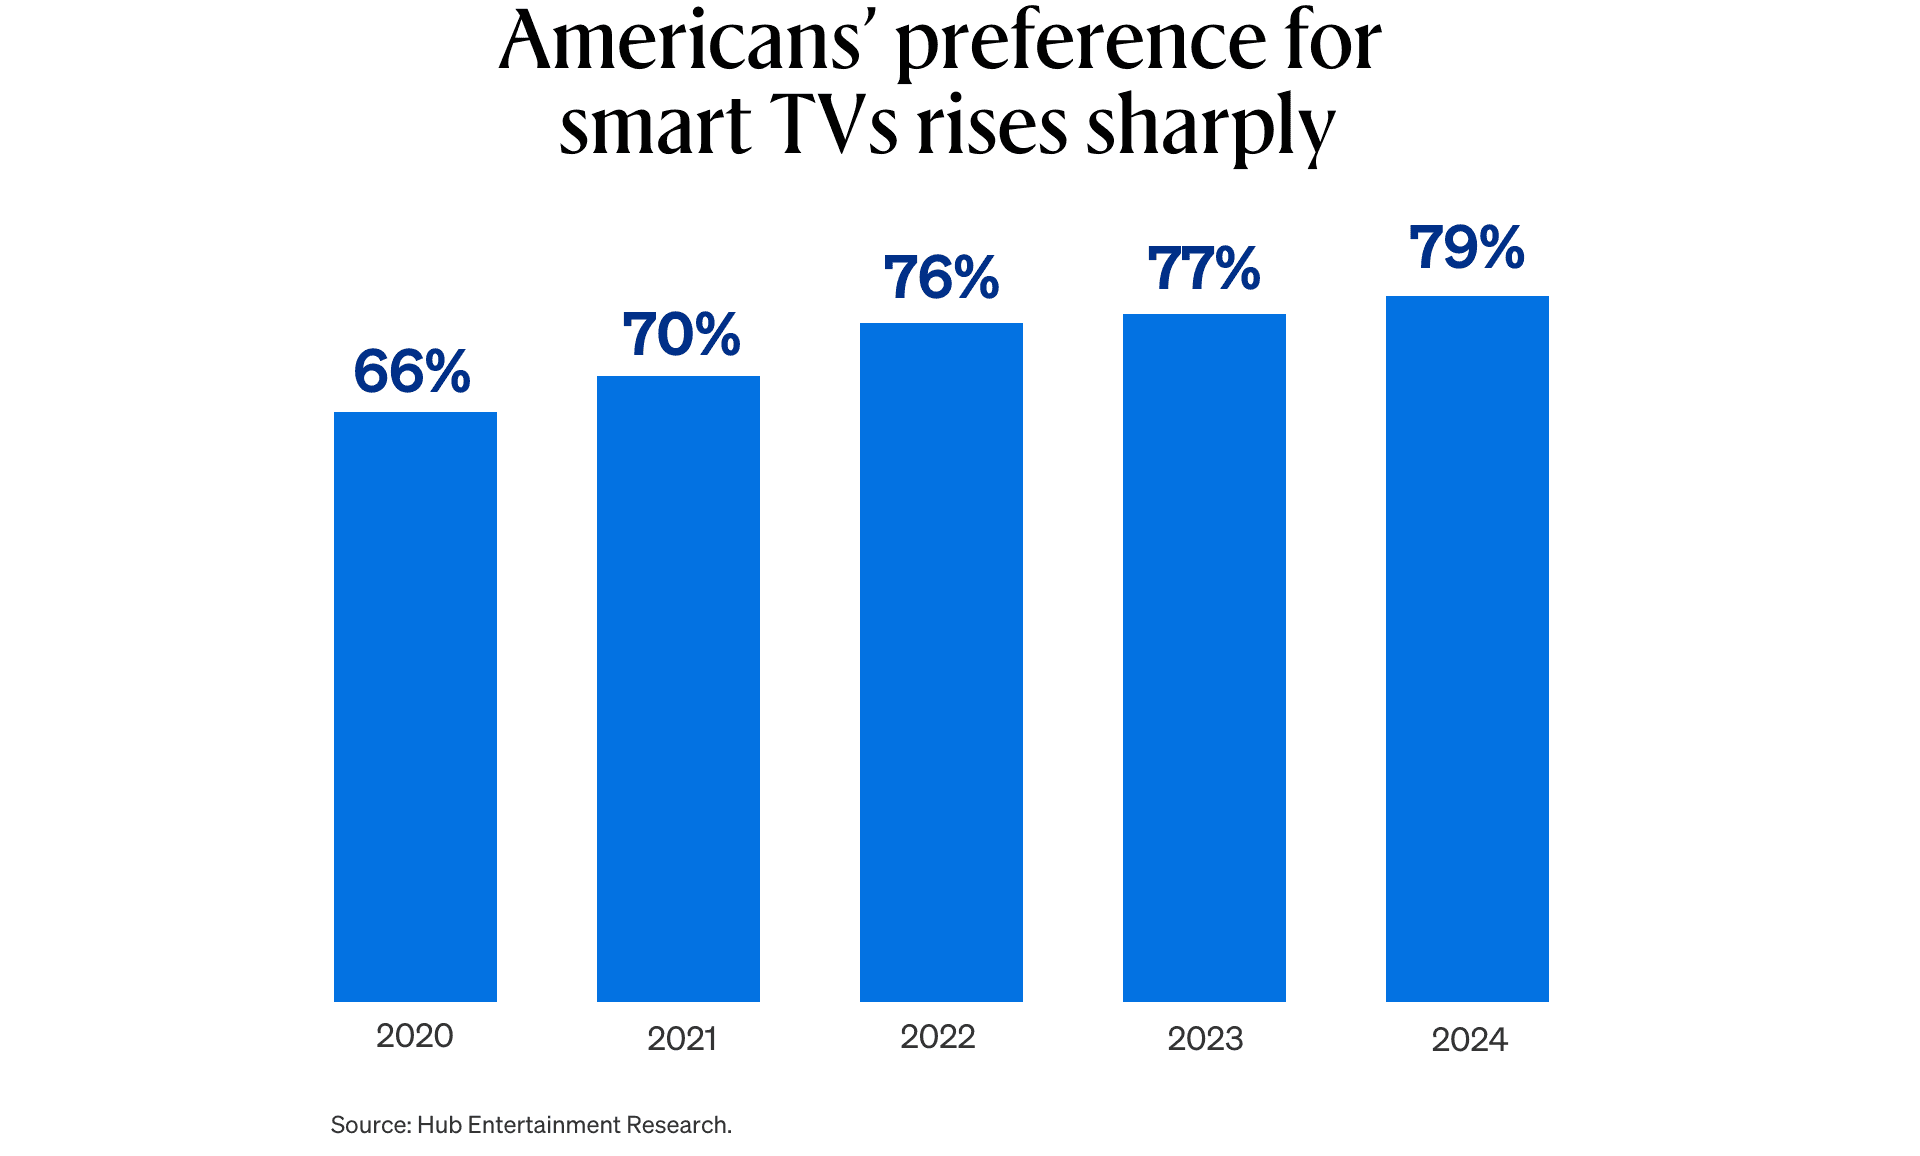 Graph titled "American's preference for smart TV's rises sharply" showing growth in preference from 2020 to 2024..